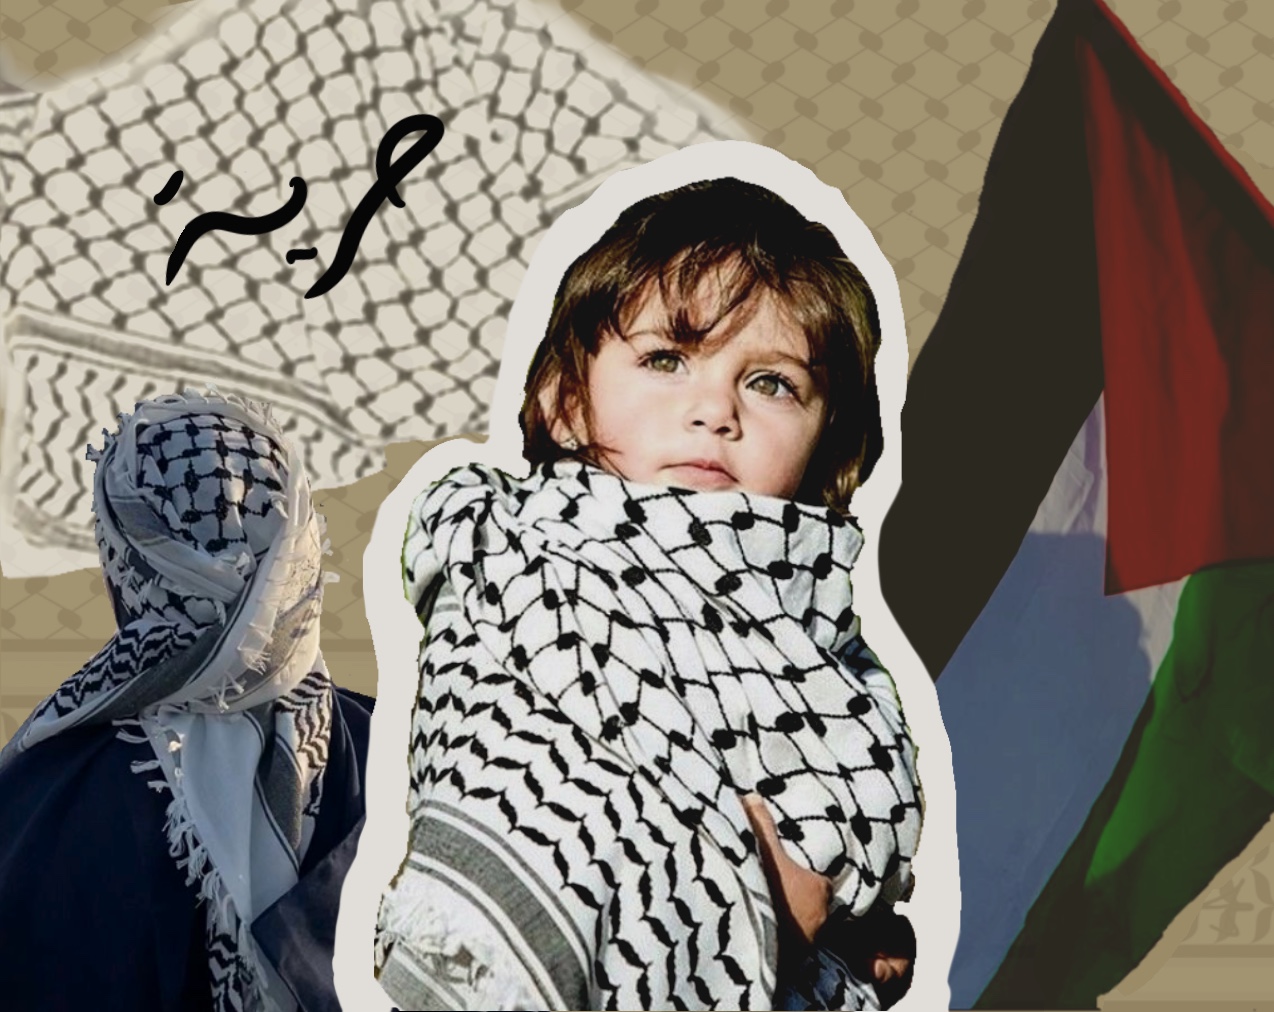 The Keffiyeh: A Symbol of Resilience of the Palestinian People